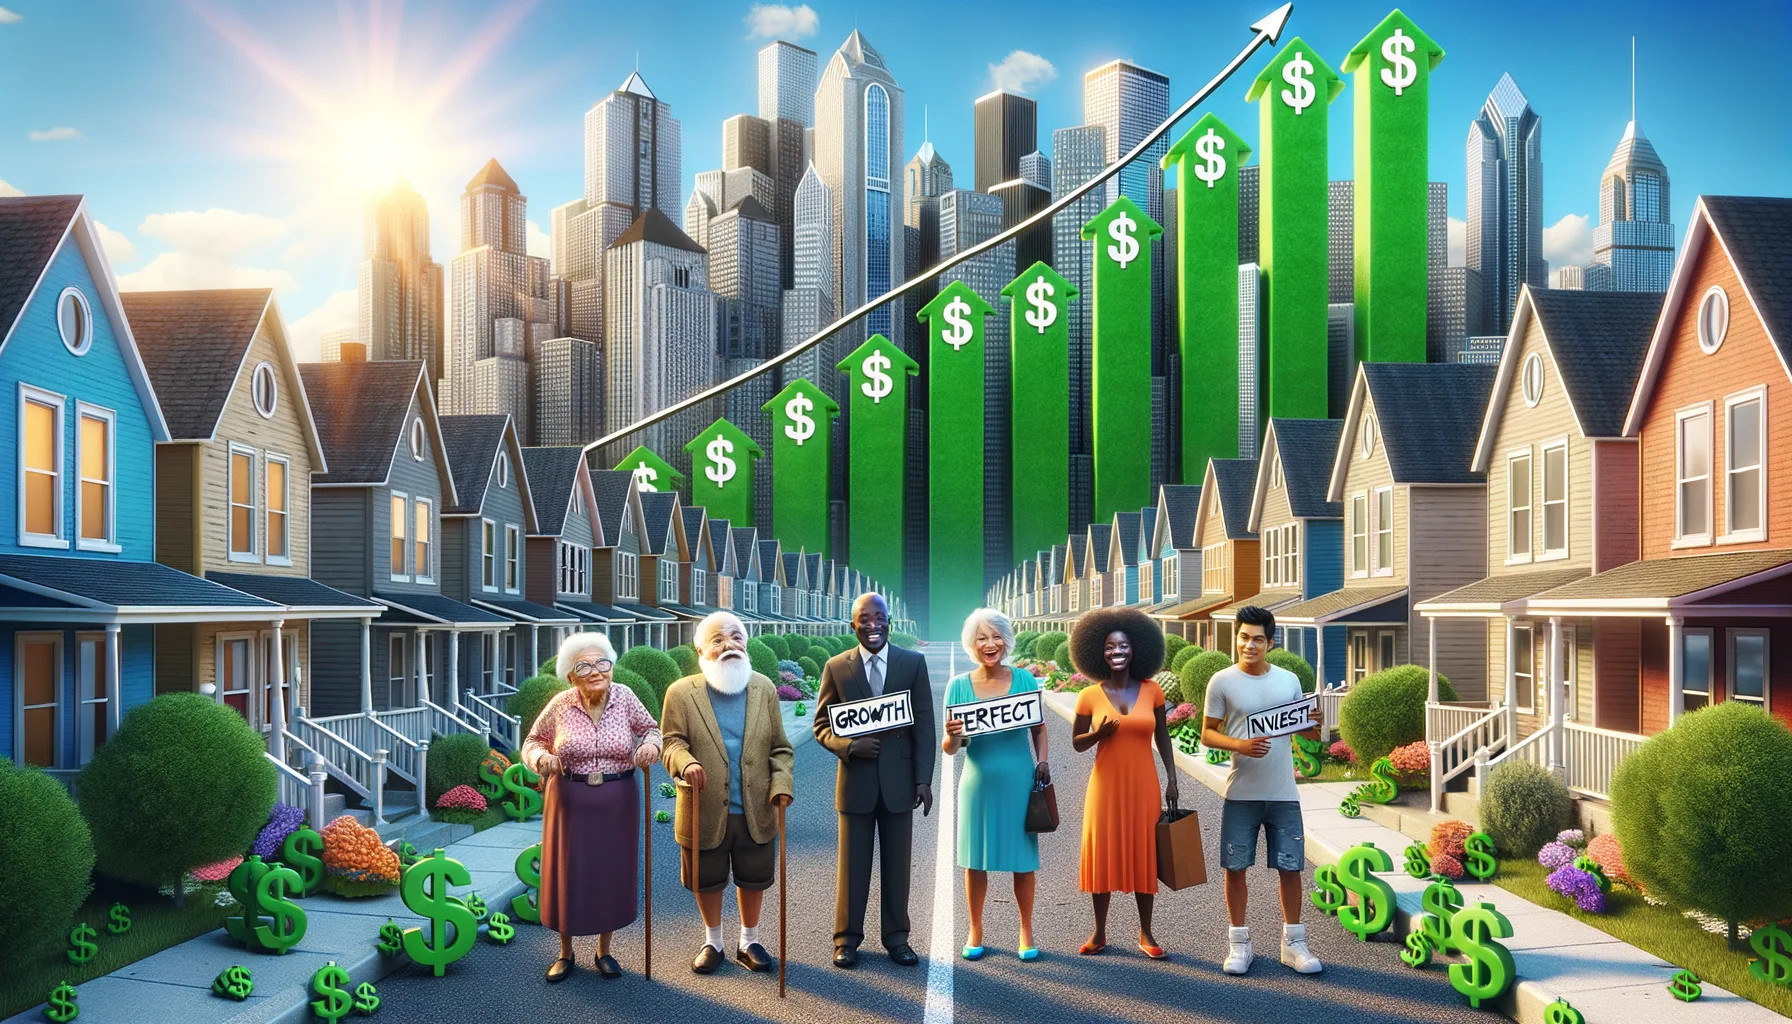 Create a humorous and believable image illustrating a utopian real estate market scenario. Picture a bustling city with skyscrapers adorned by green 'Growth' charts that climb higher than the buildings themselves. On the main street, depict a myriad of potential buyers - an Black elderly woman, a Hispanic middle-aged man, a South Asian young woman, a Middle Eastern teenage boy - each holding a sign, 'Perfect Investment'. In the background, a sea of houses, all charmingly desirable, with price tags that depict only slight fluctuations. The sun shines brightly, casting the shadows of dollar symbols on the pavement.